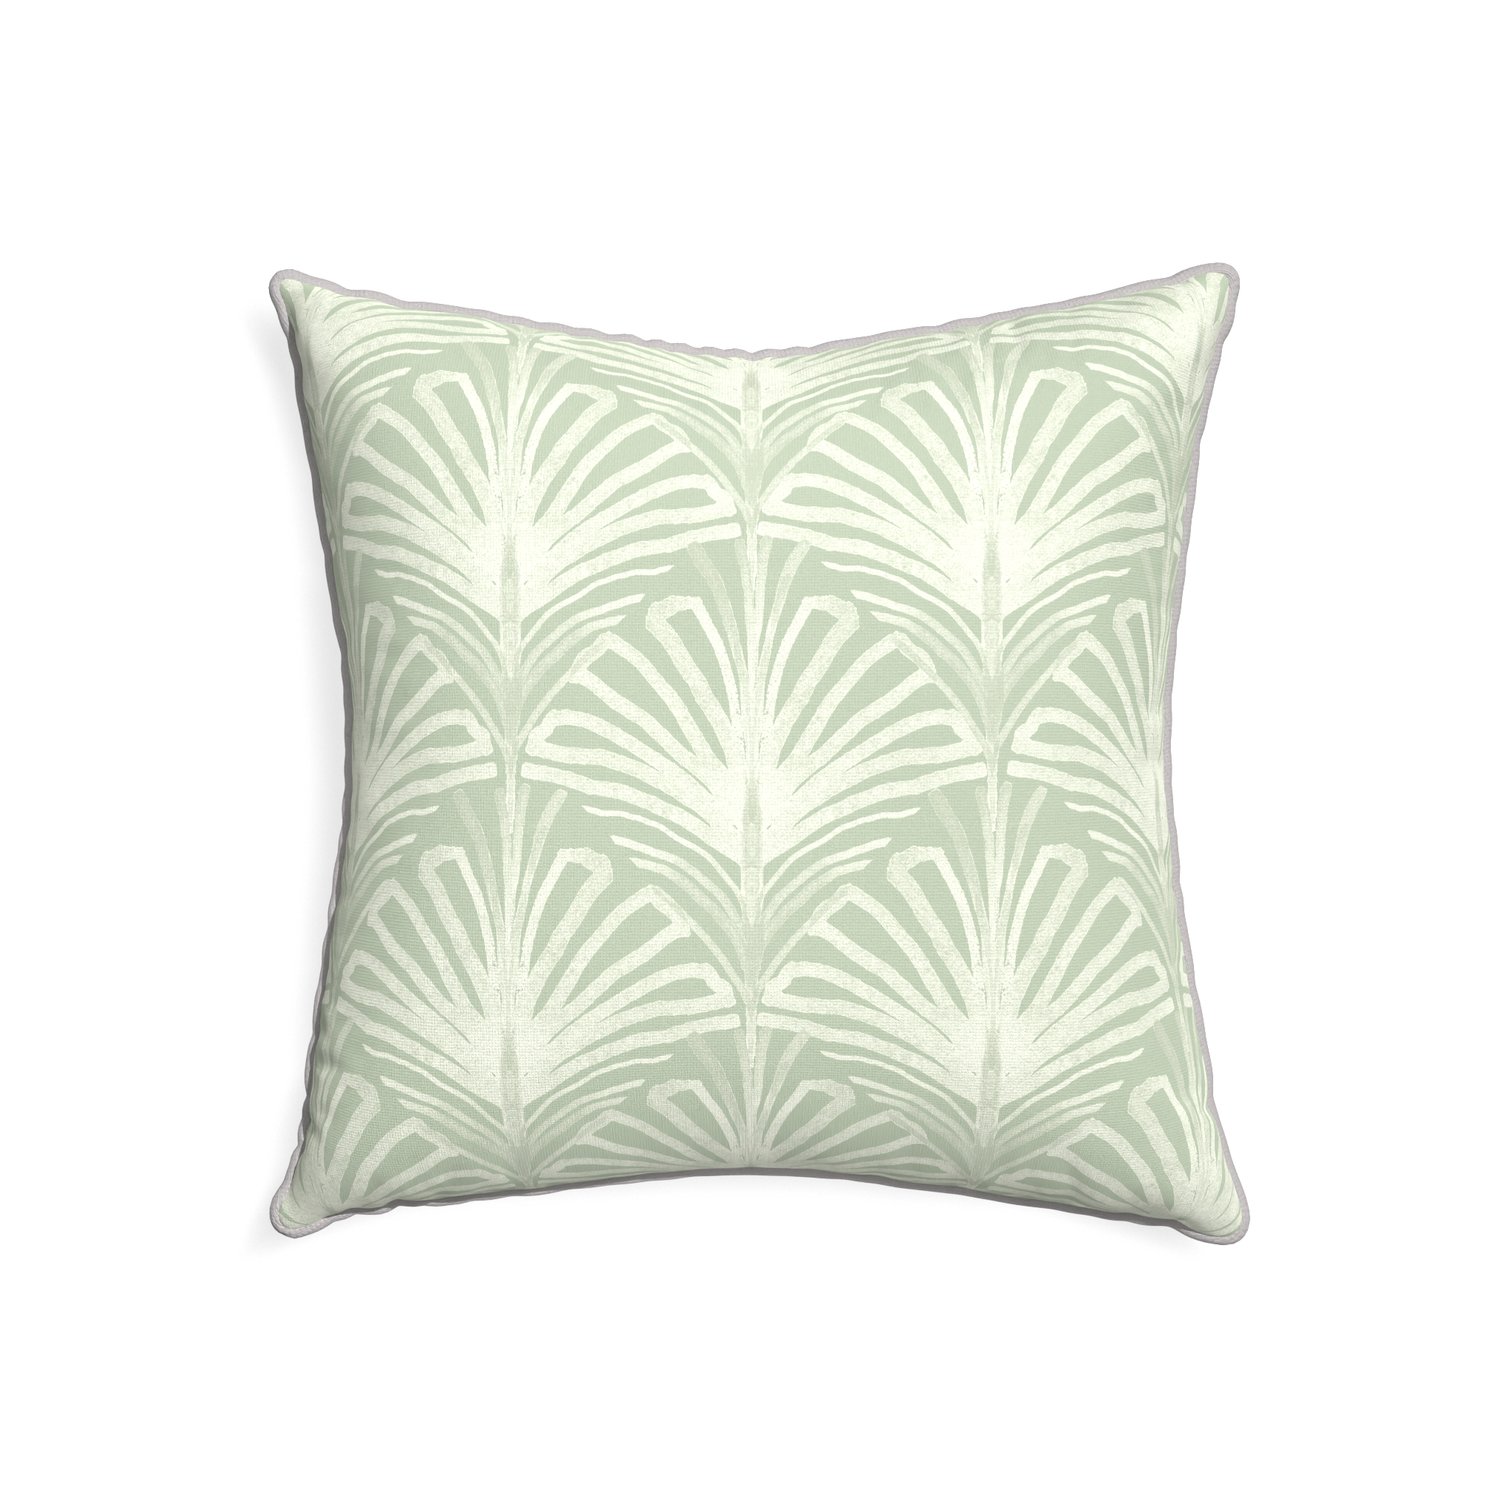 22-square suzy sage custom sage green palmpillow with pebble piping on white background